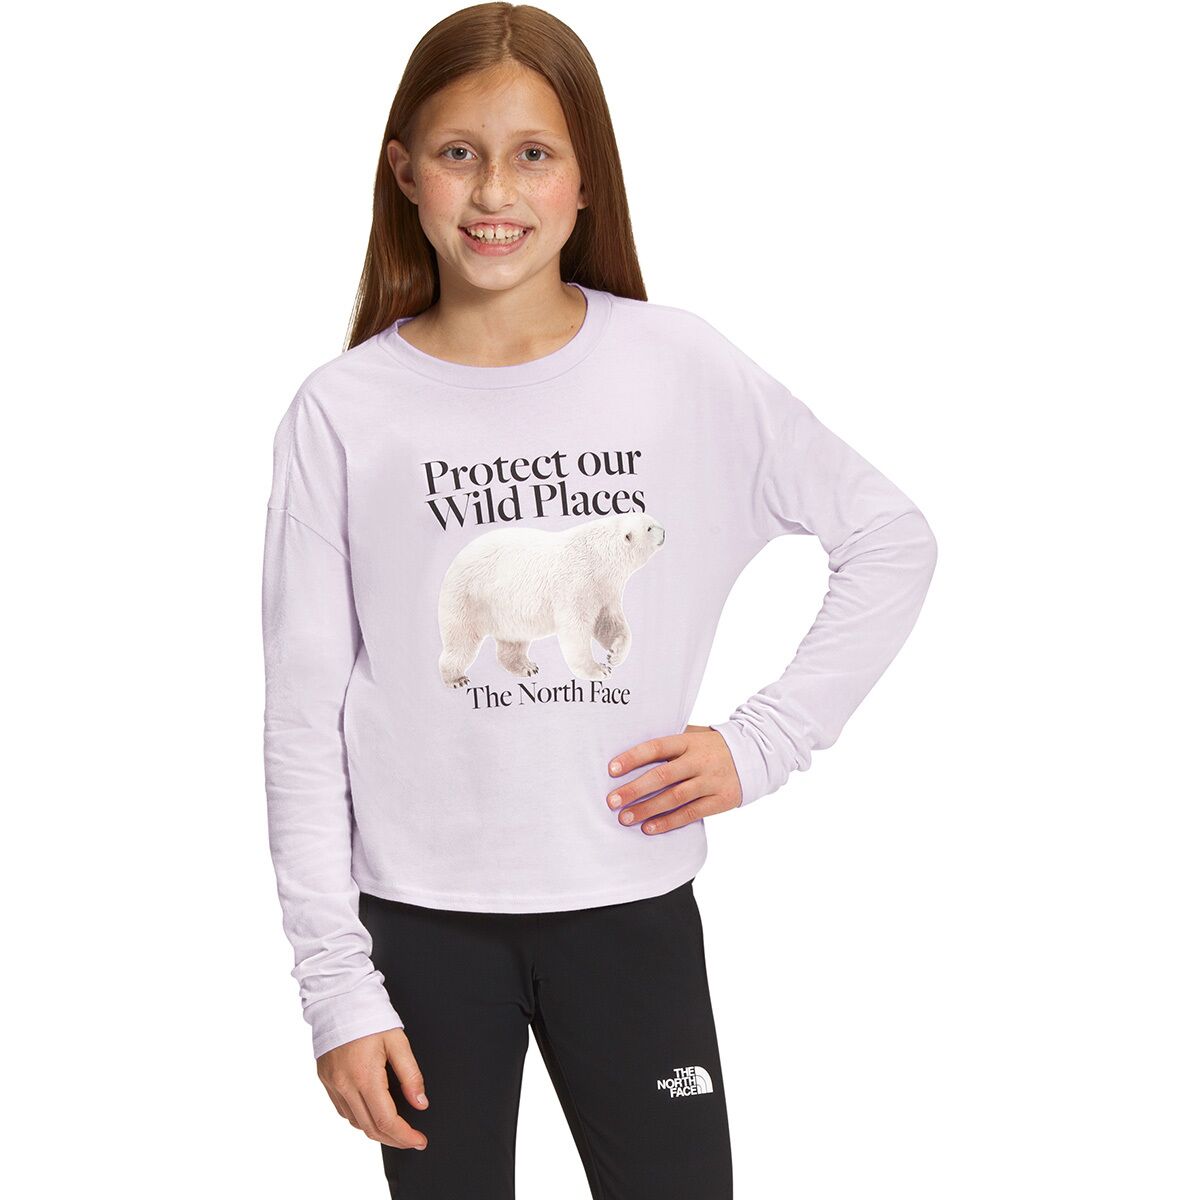 The North Face Graphic Long-Sleeve T-Shirt - Girls'